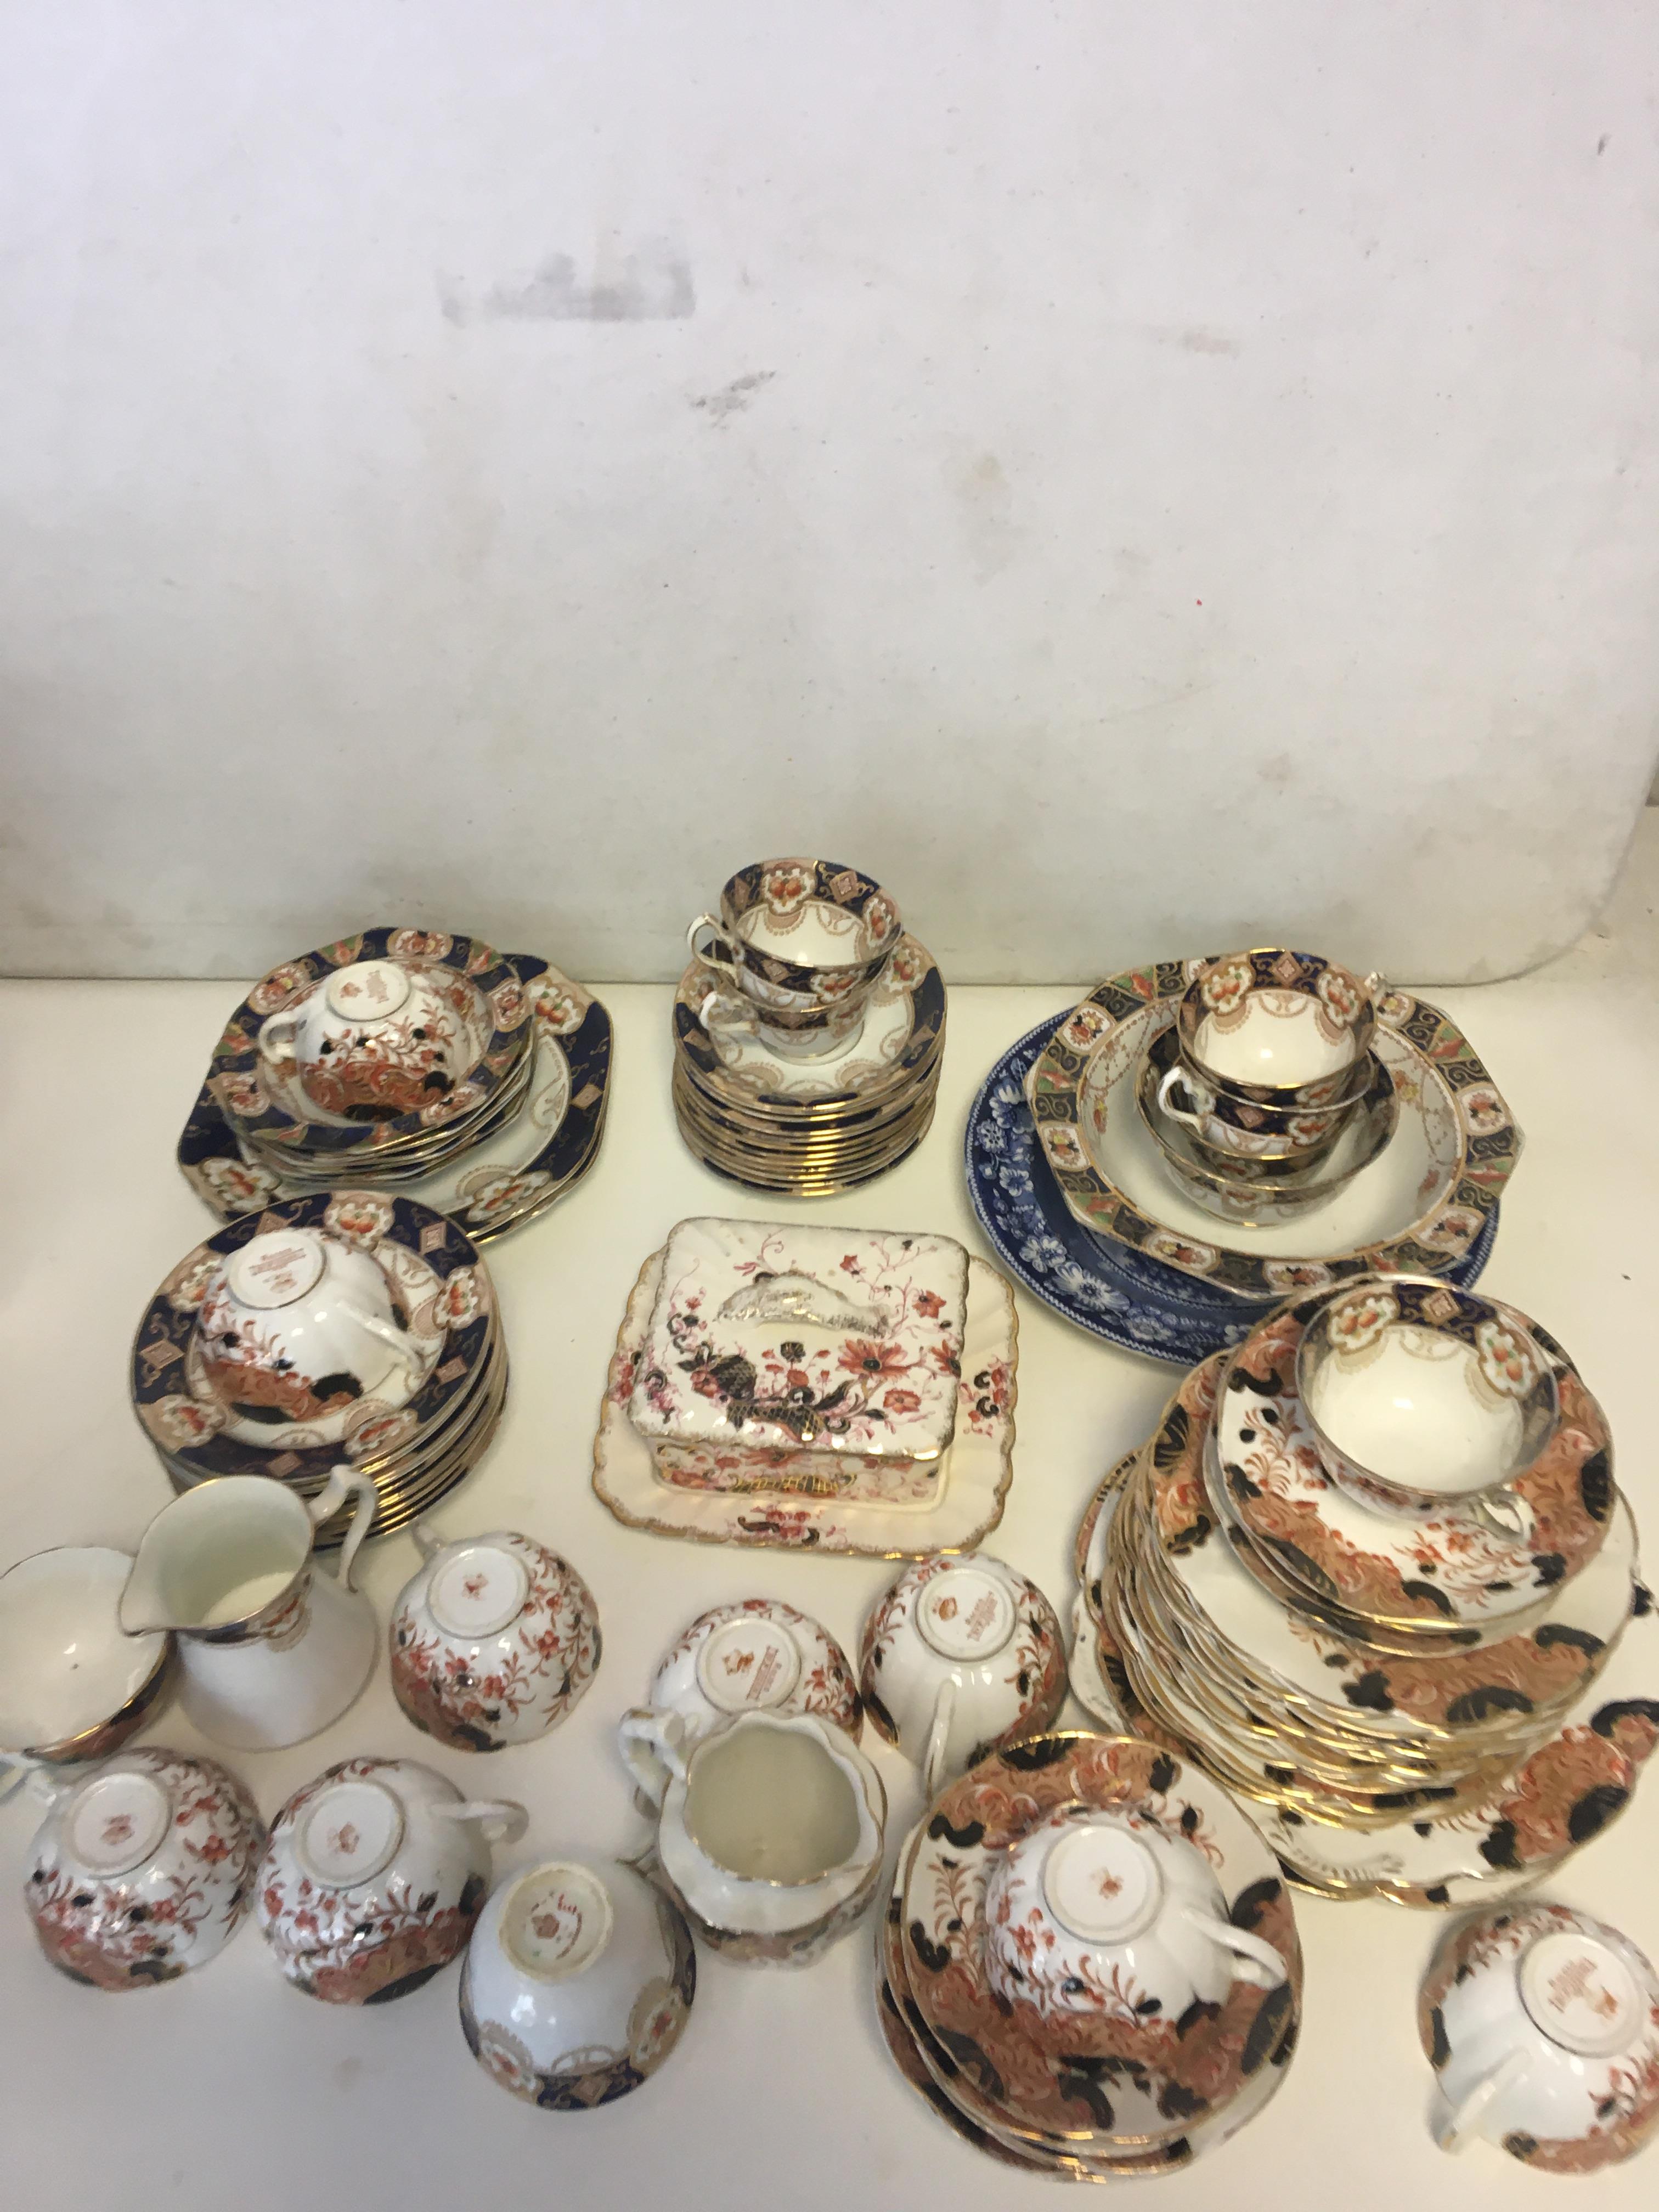 Assorted vintage china plates